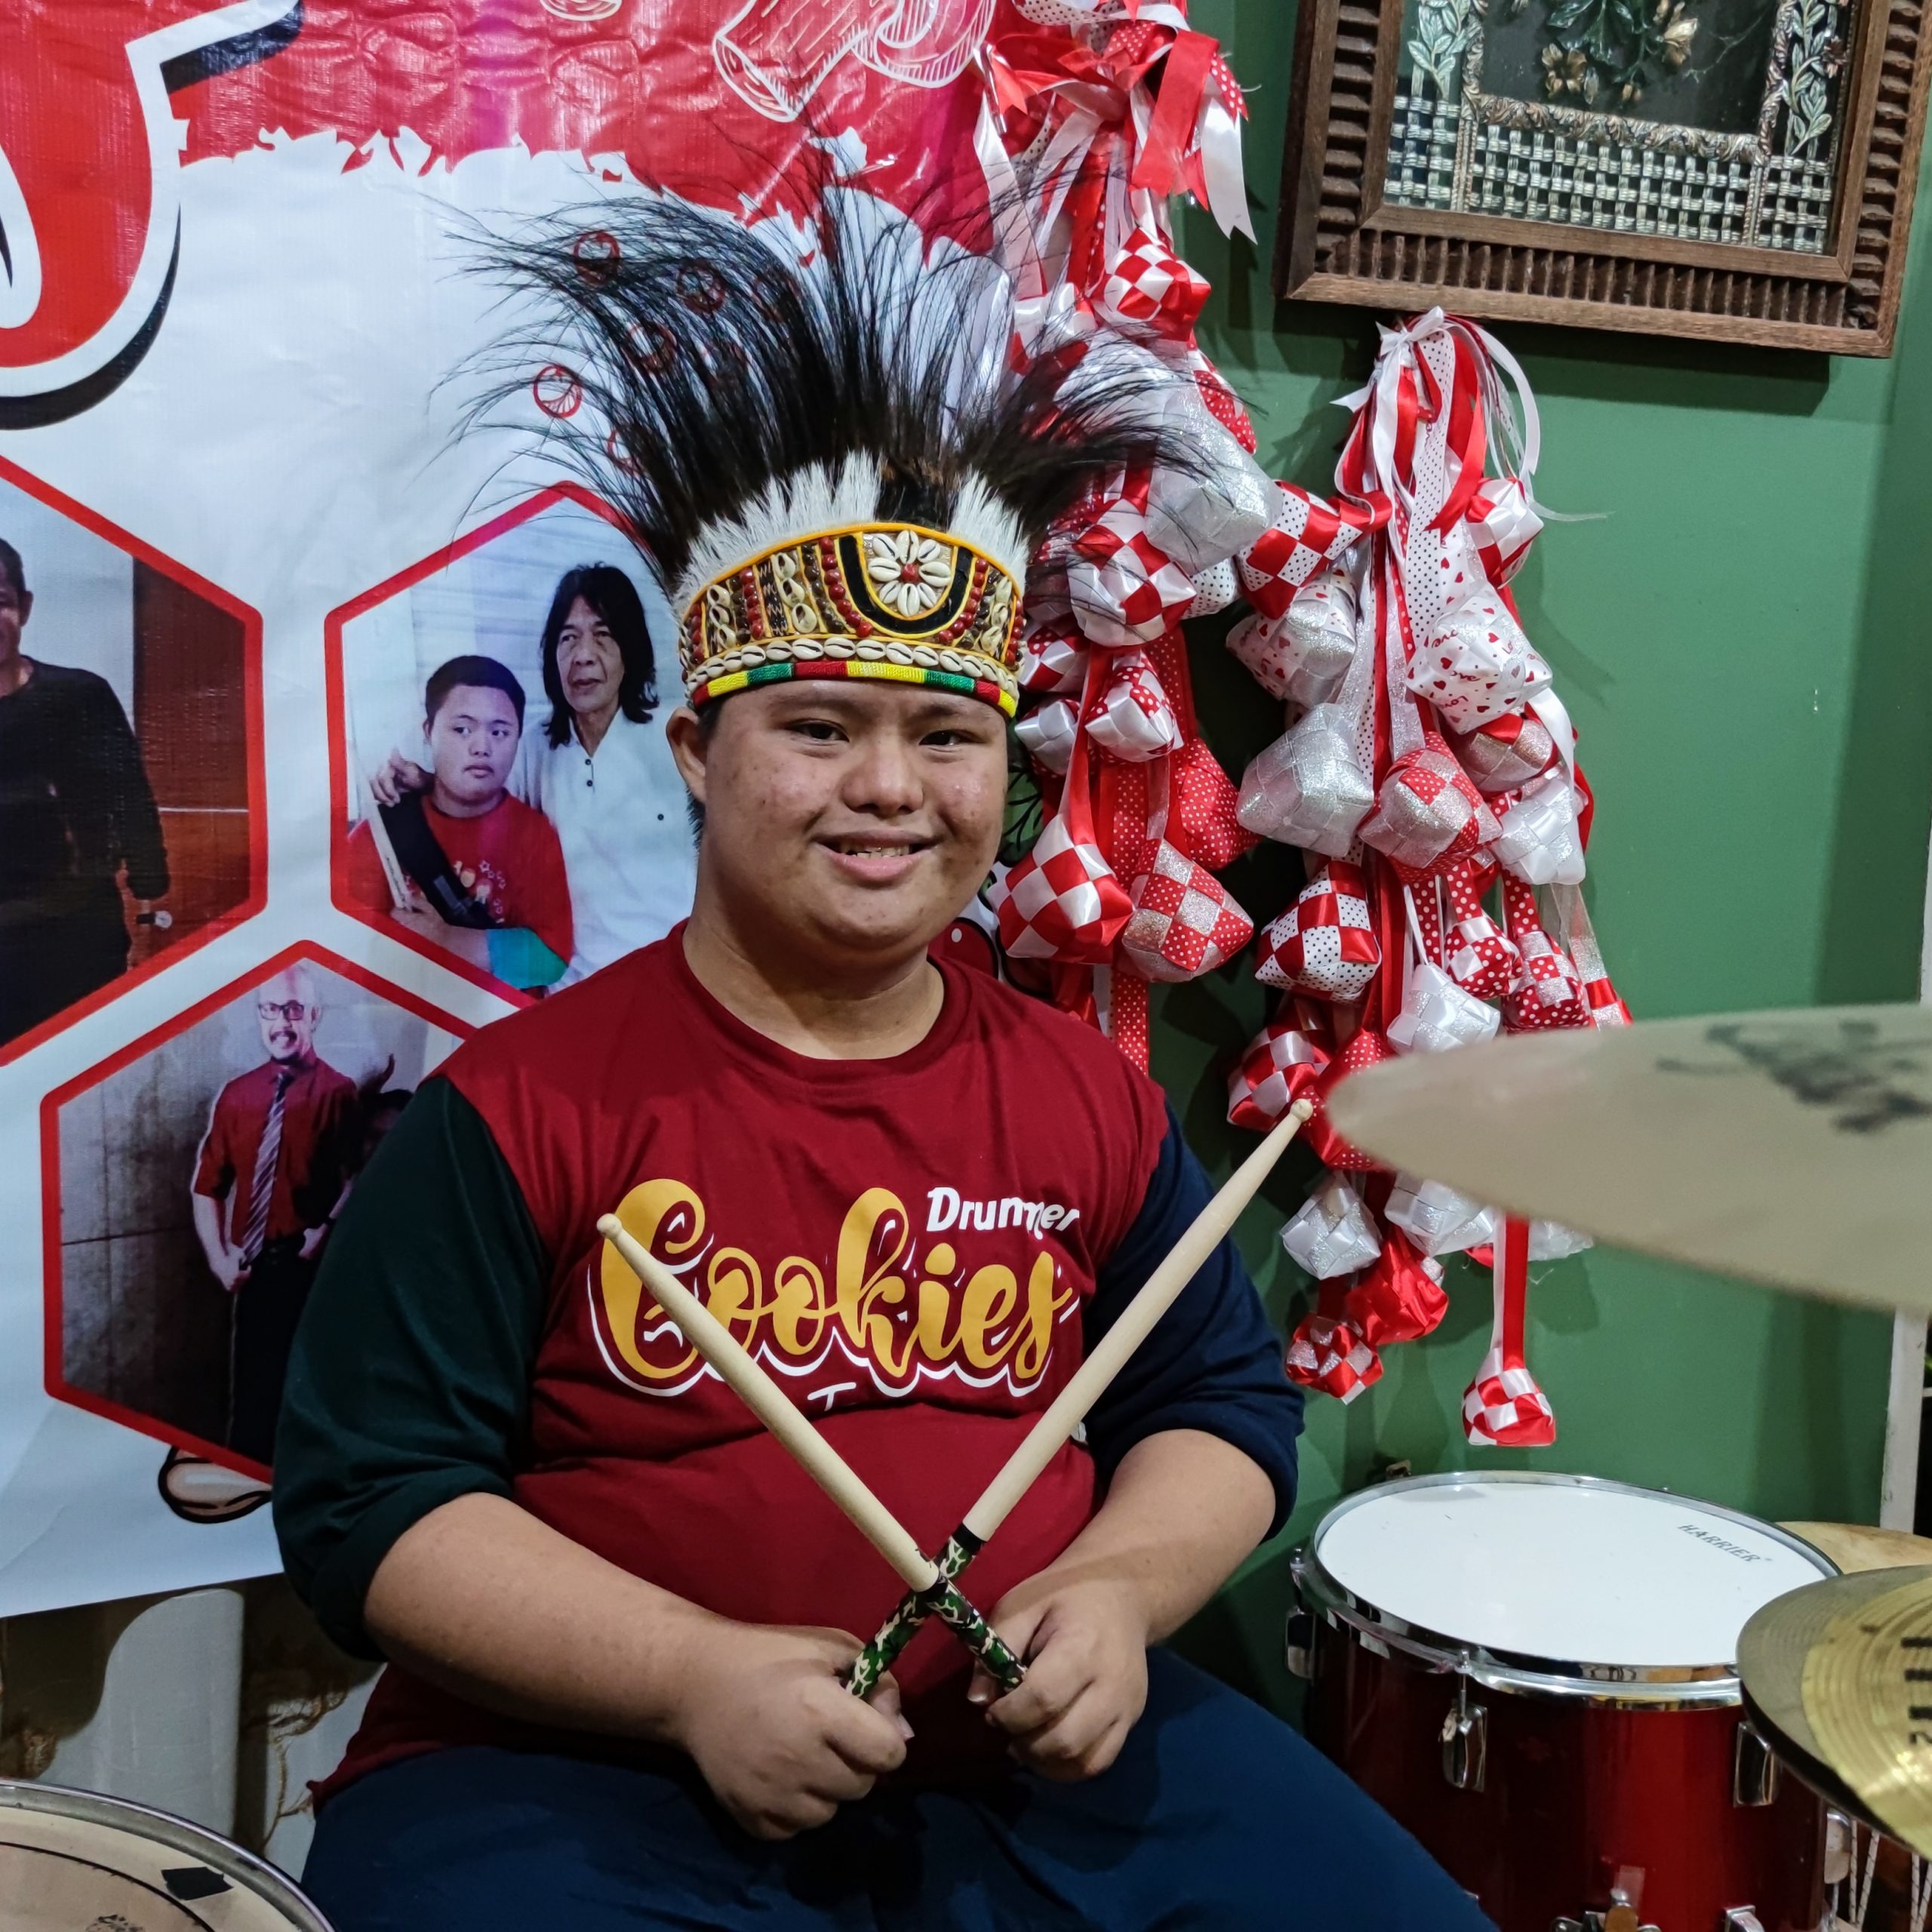 I aspire to be the first drummer with Down syndrome to travel the world